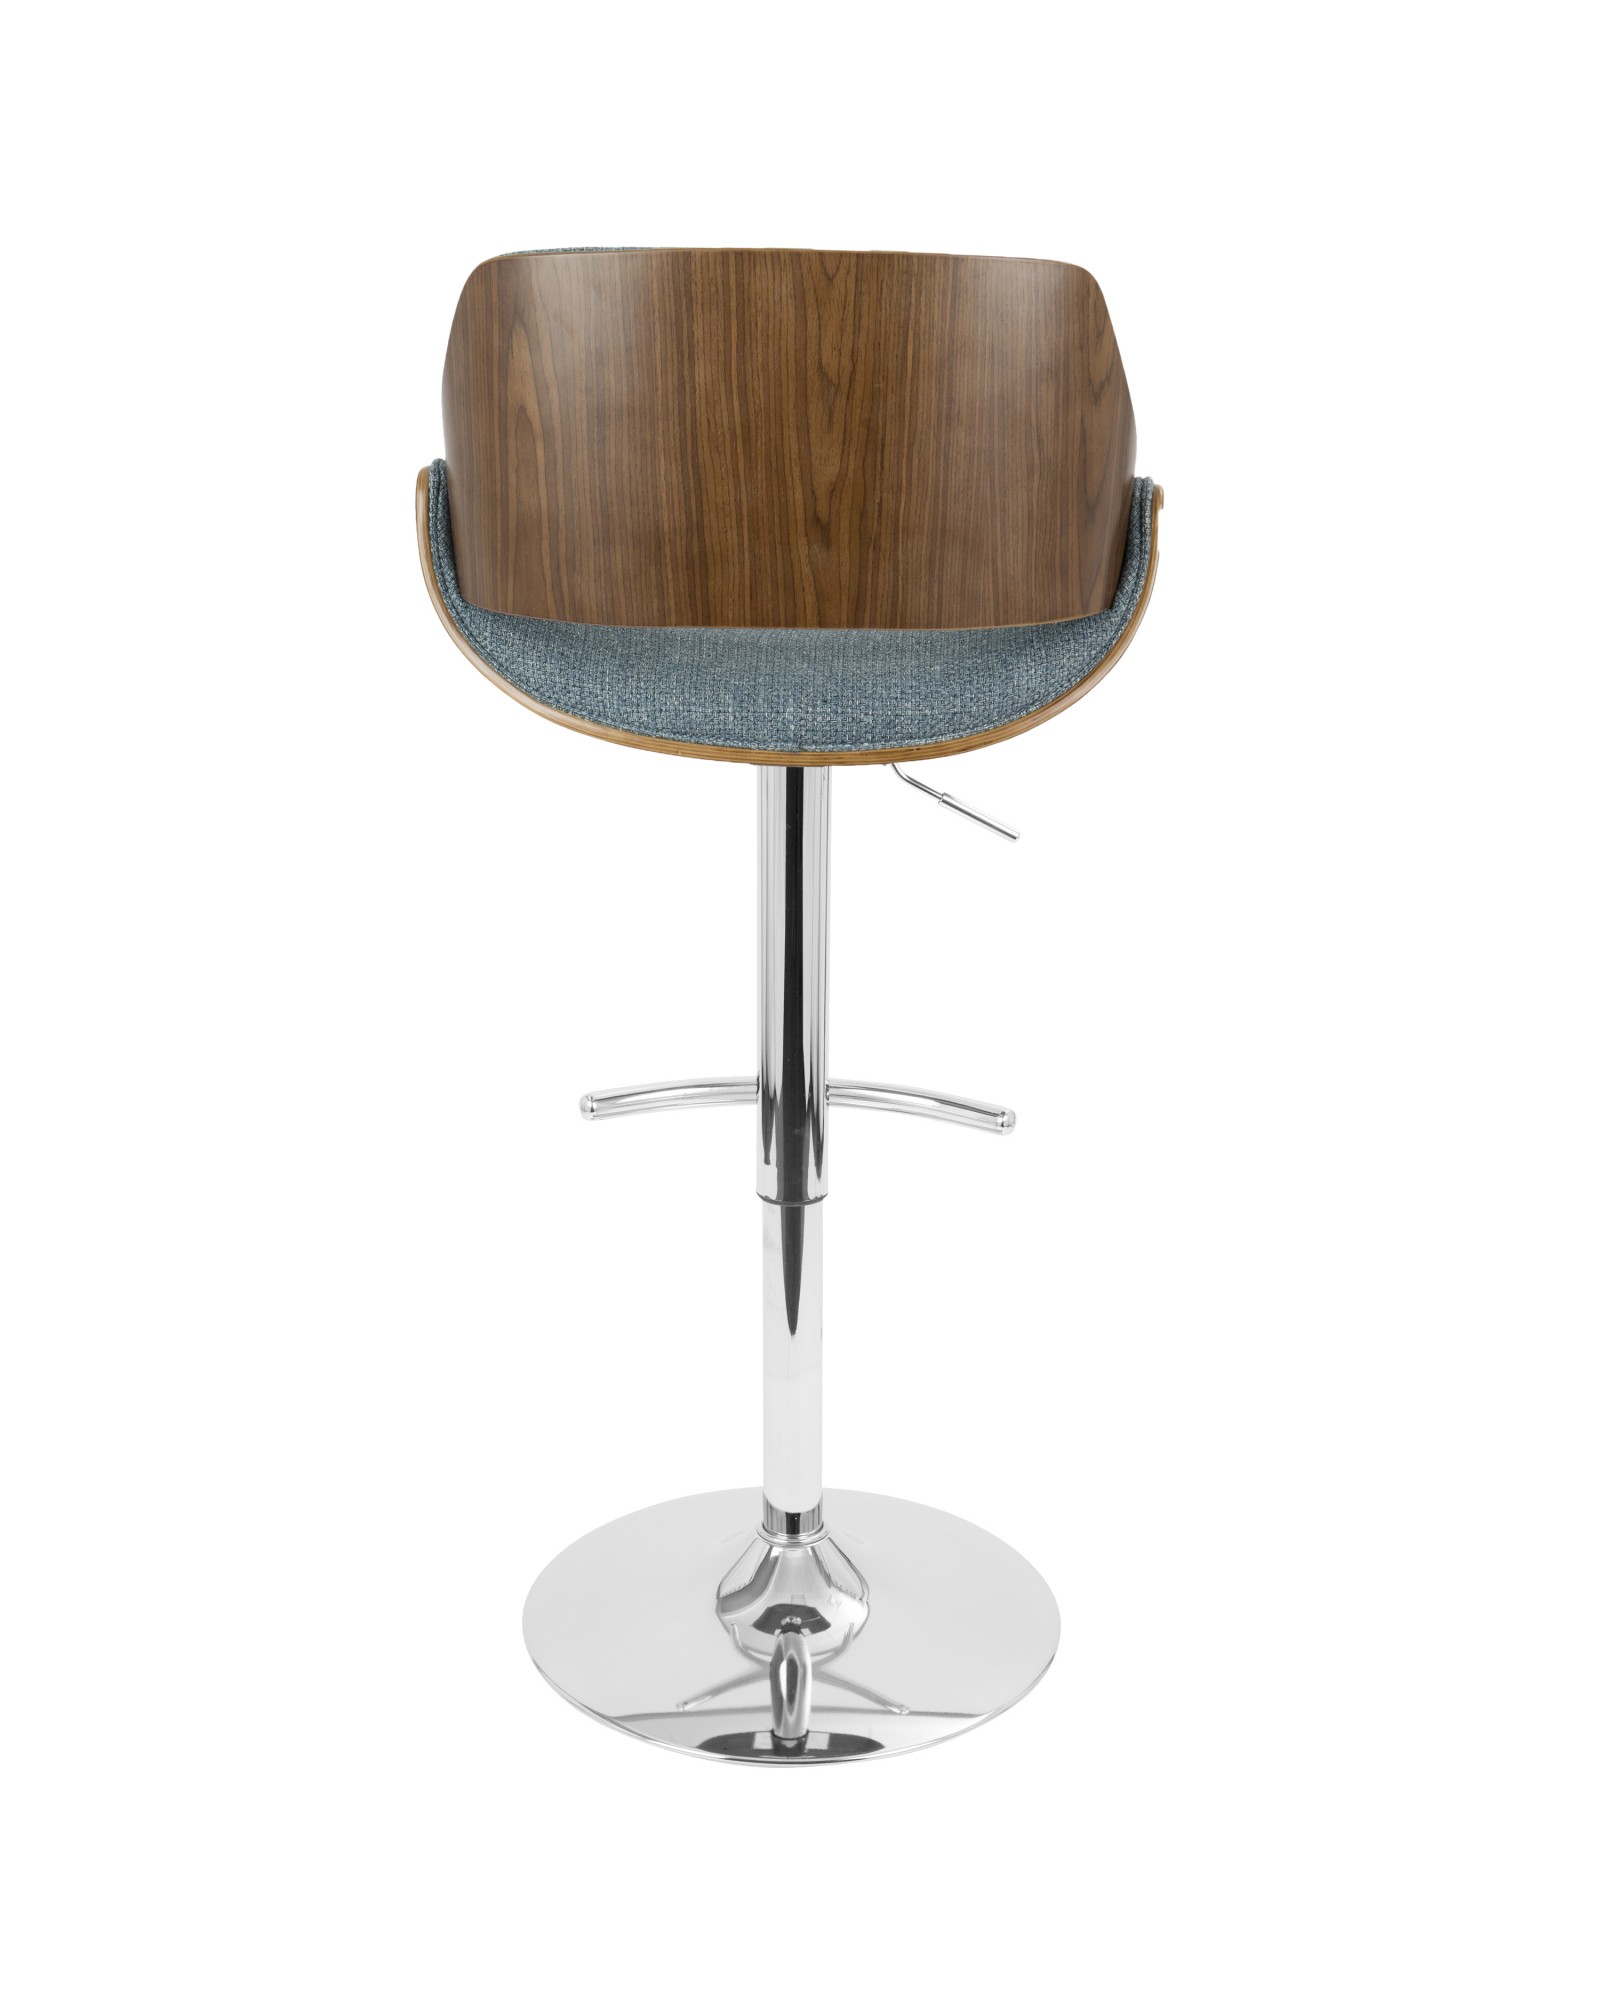 Fabrizzi Mid-Century Modern Adjustable Barstool with Swivel in Walnut and Blue